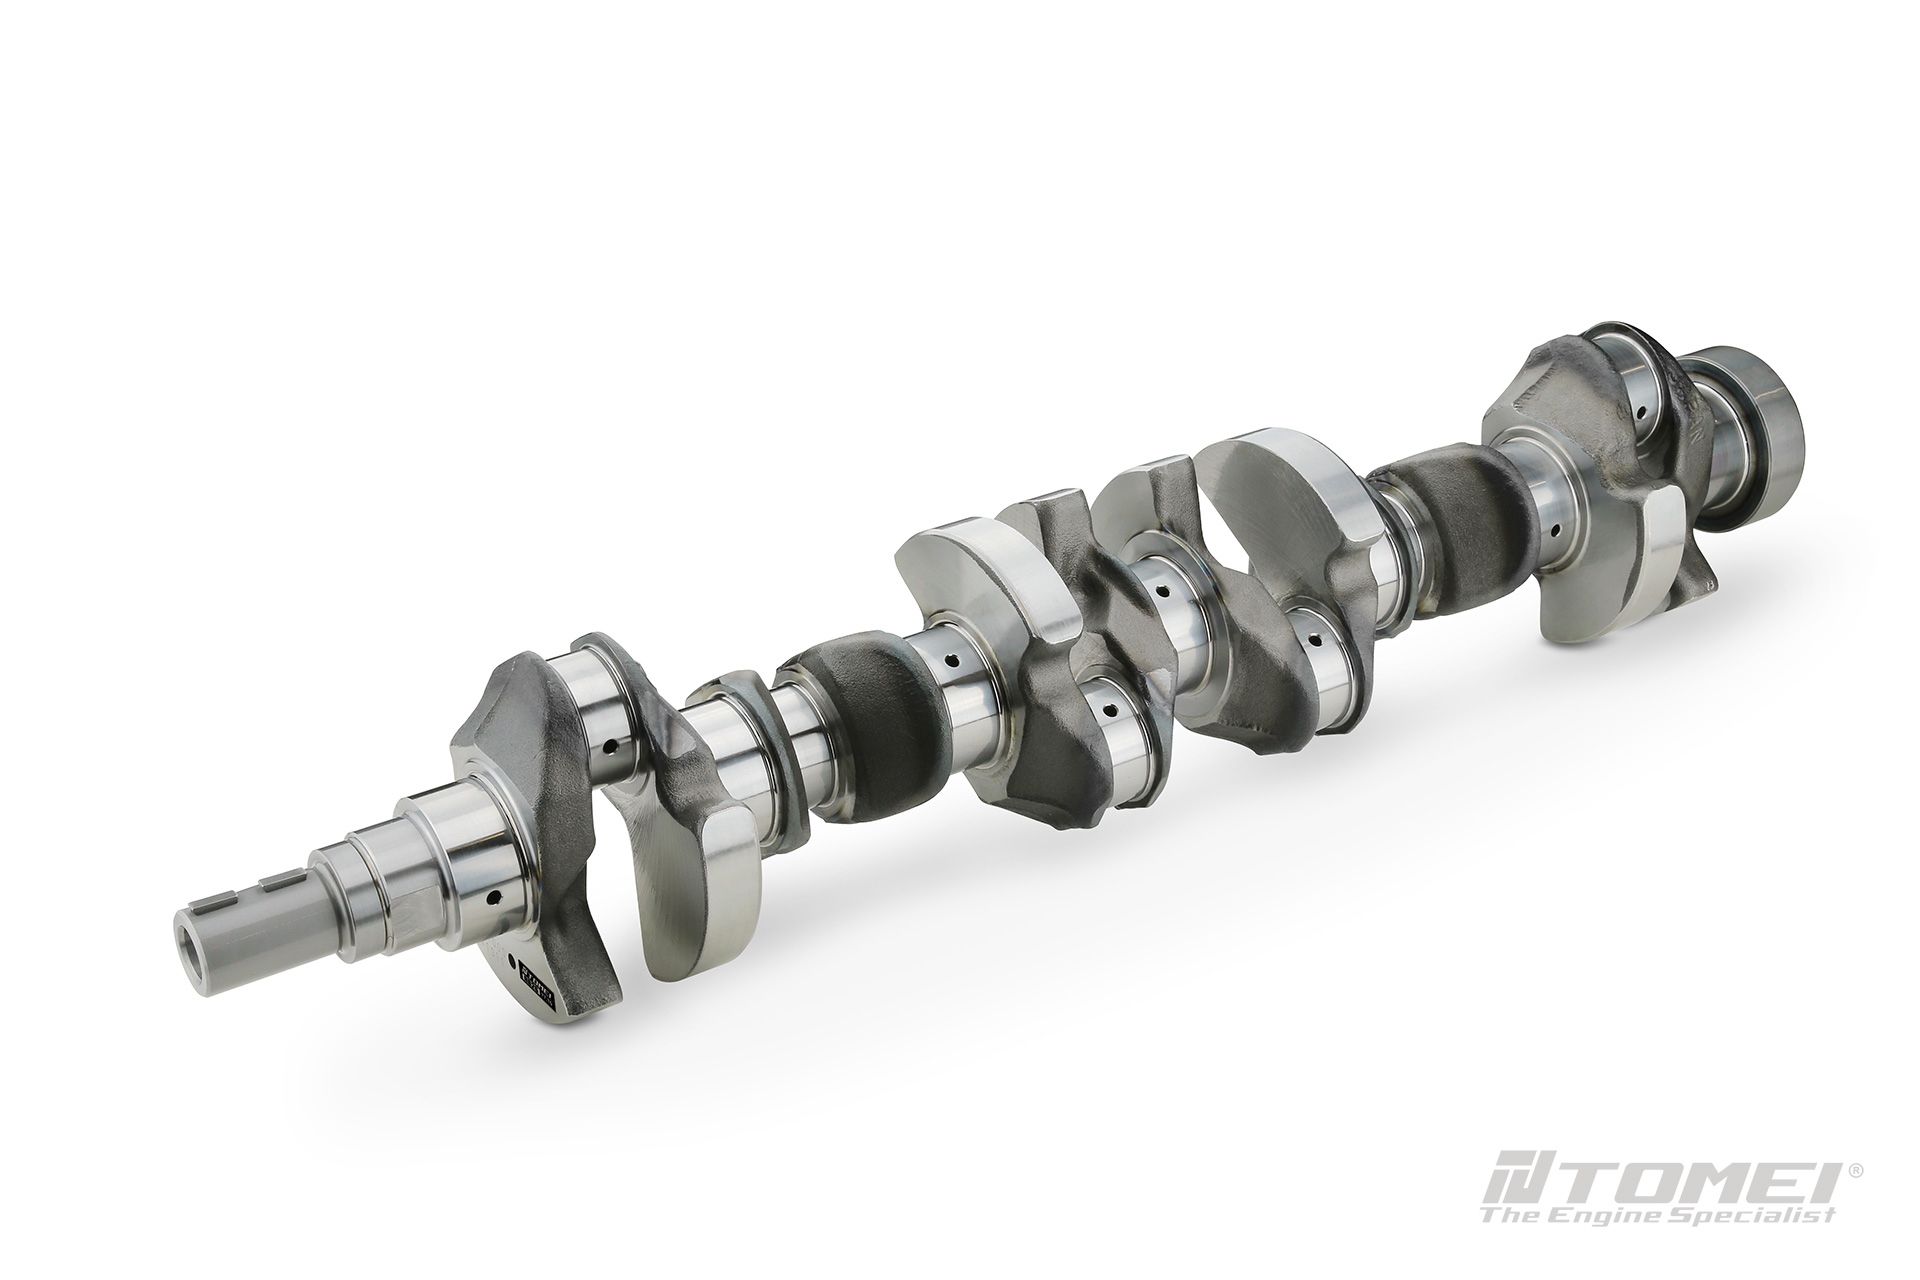 Tomei Forged 8 Counterweight Crankshaft RB28